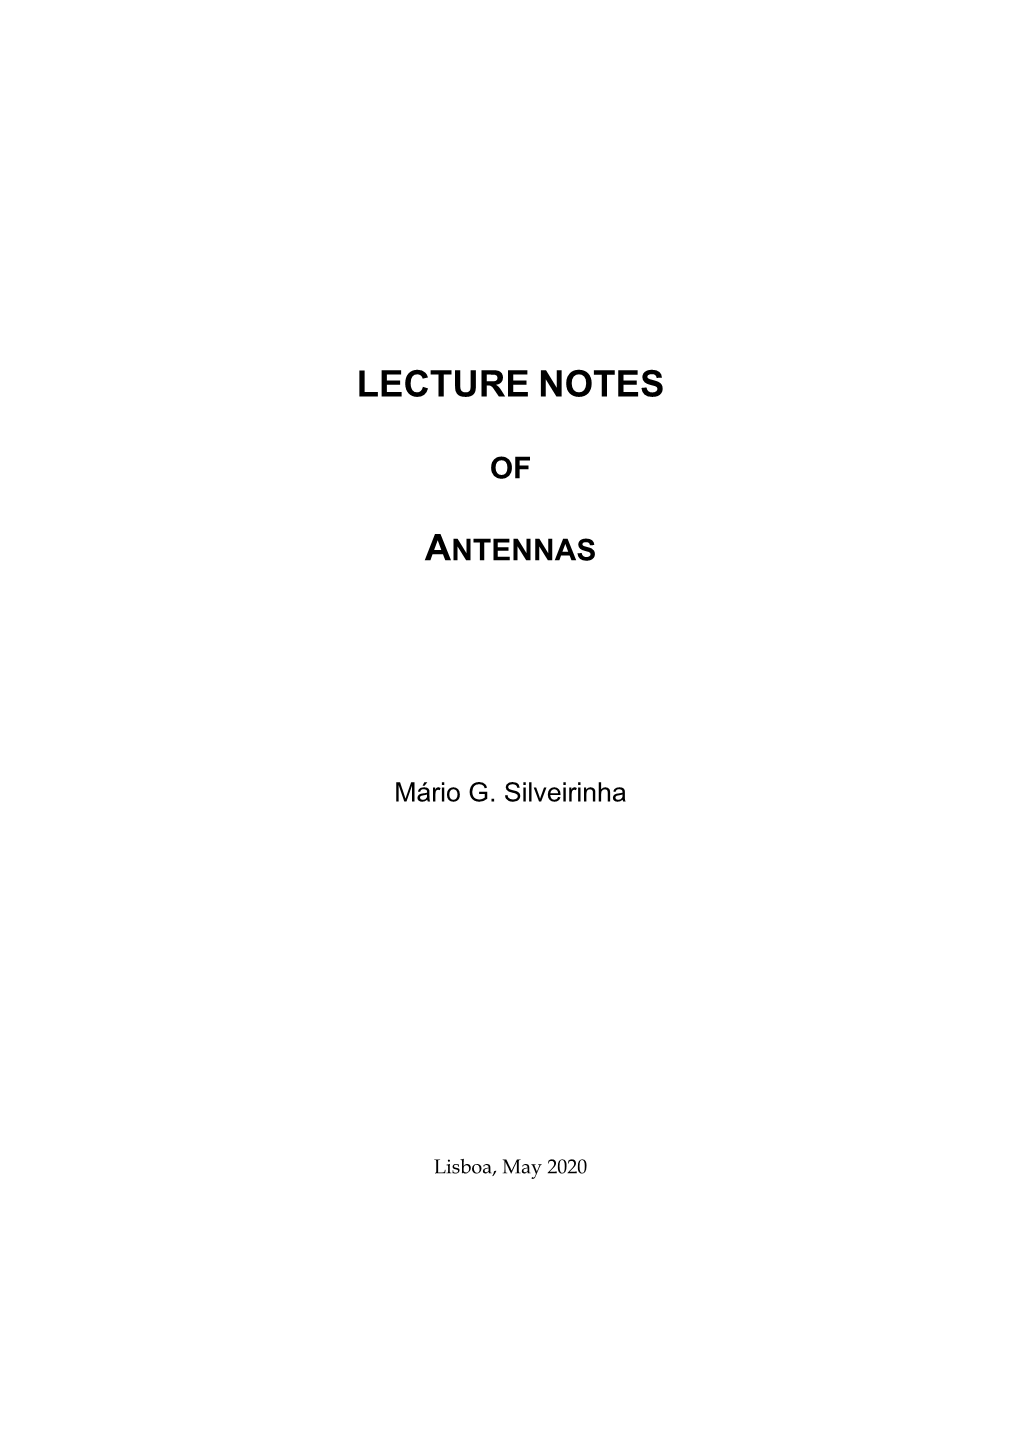 Lecture Notes of Antennas